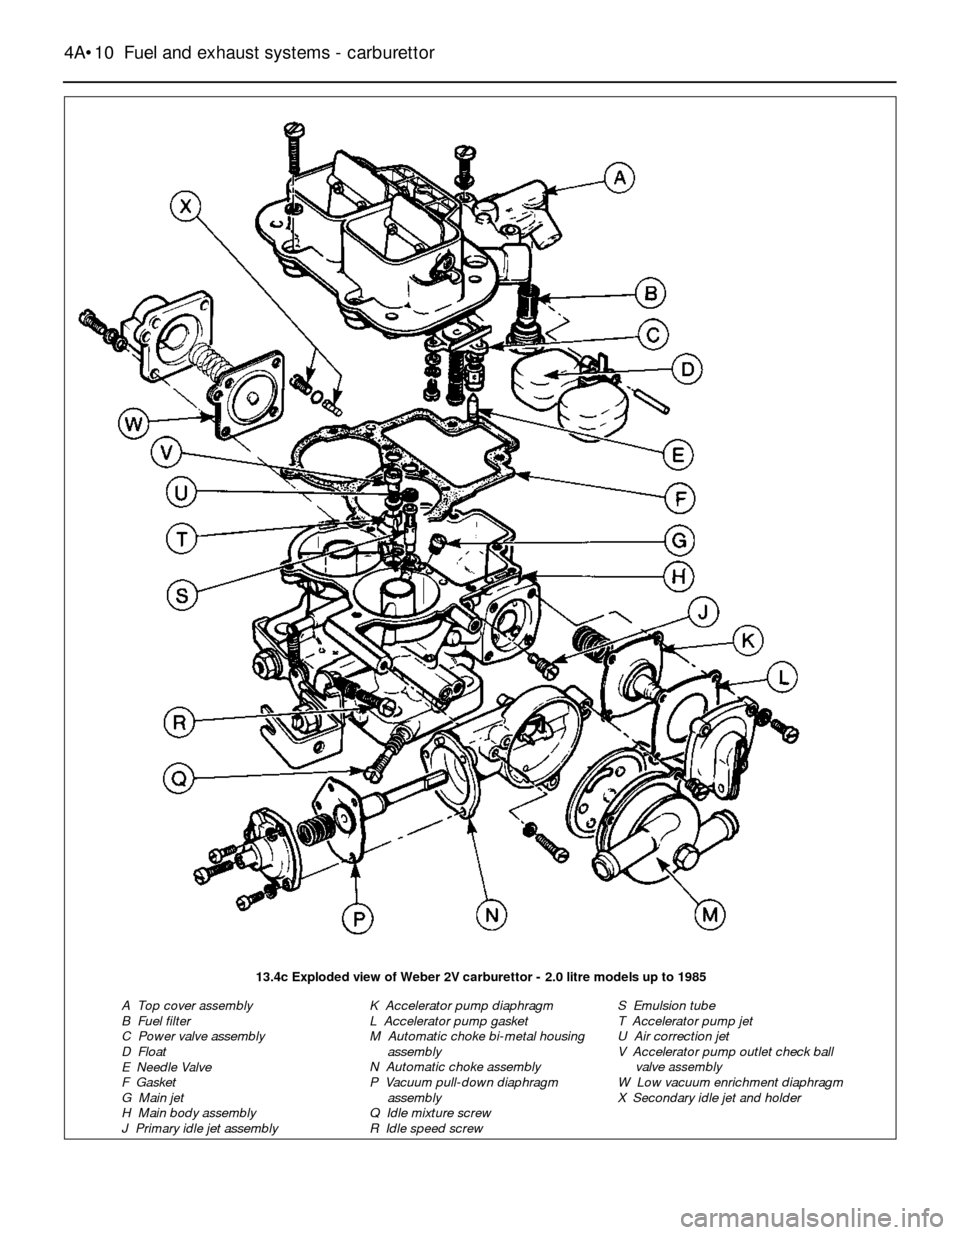 FORD SIERRA 1986 1.G Fuel And Exhaust Systems Carburettor Workshop Manual 4A•10Fuel and exhaust systems - carburettor
13.4c Exploded view of Weber 2V carburettor - 2.0 litre models up to 1985
A  Top cover assembly
B  Fuel filter
C  Power valve assembly
D  Float
E  Needle 